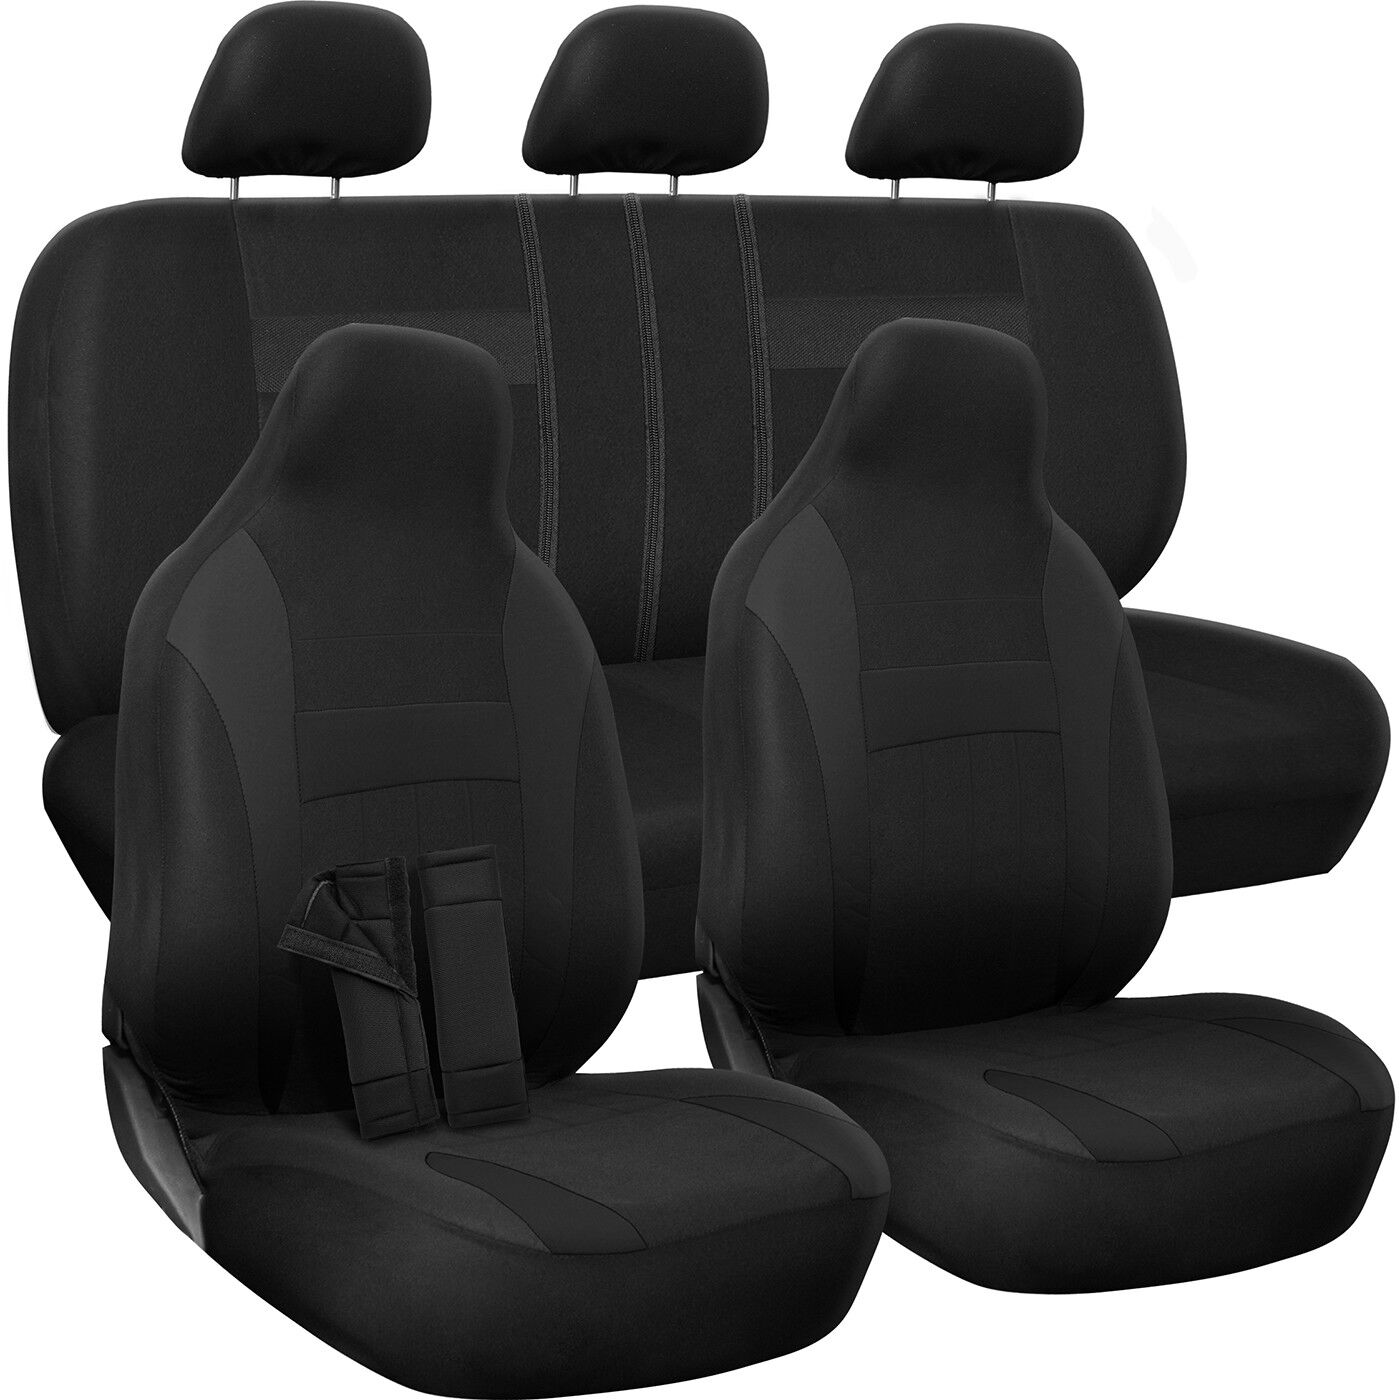 Seat Cover Complete Set for Car Truck SUV Van - Flat Poly Cloth Fabric- 10 Piece